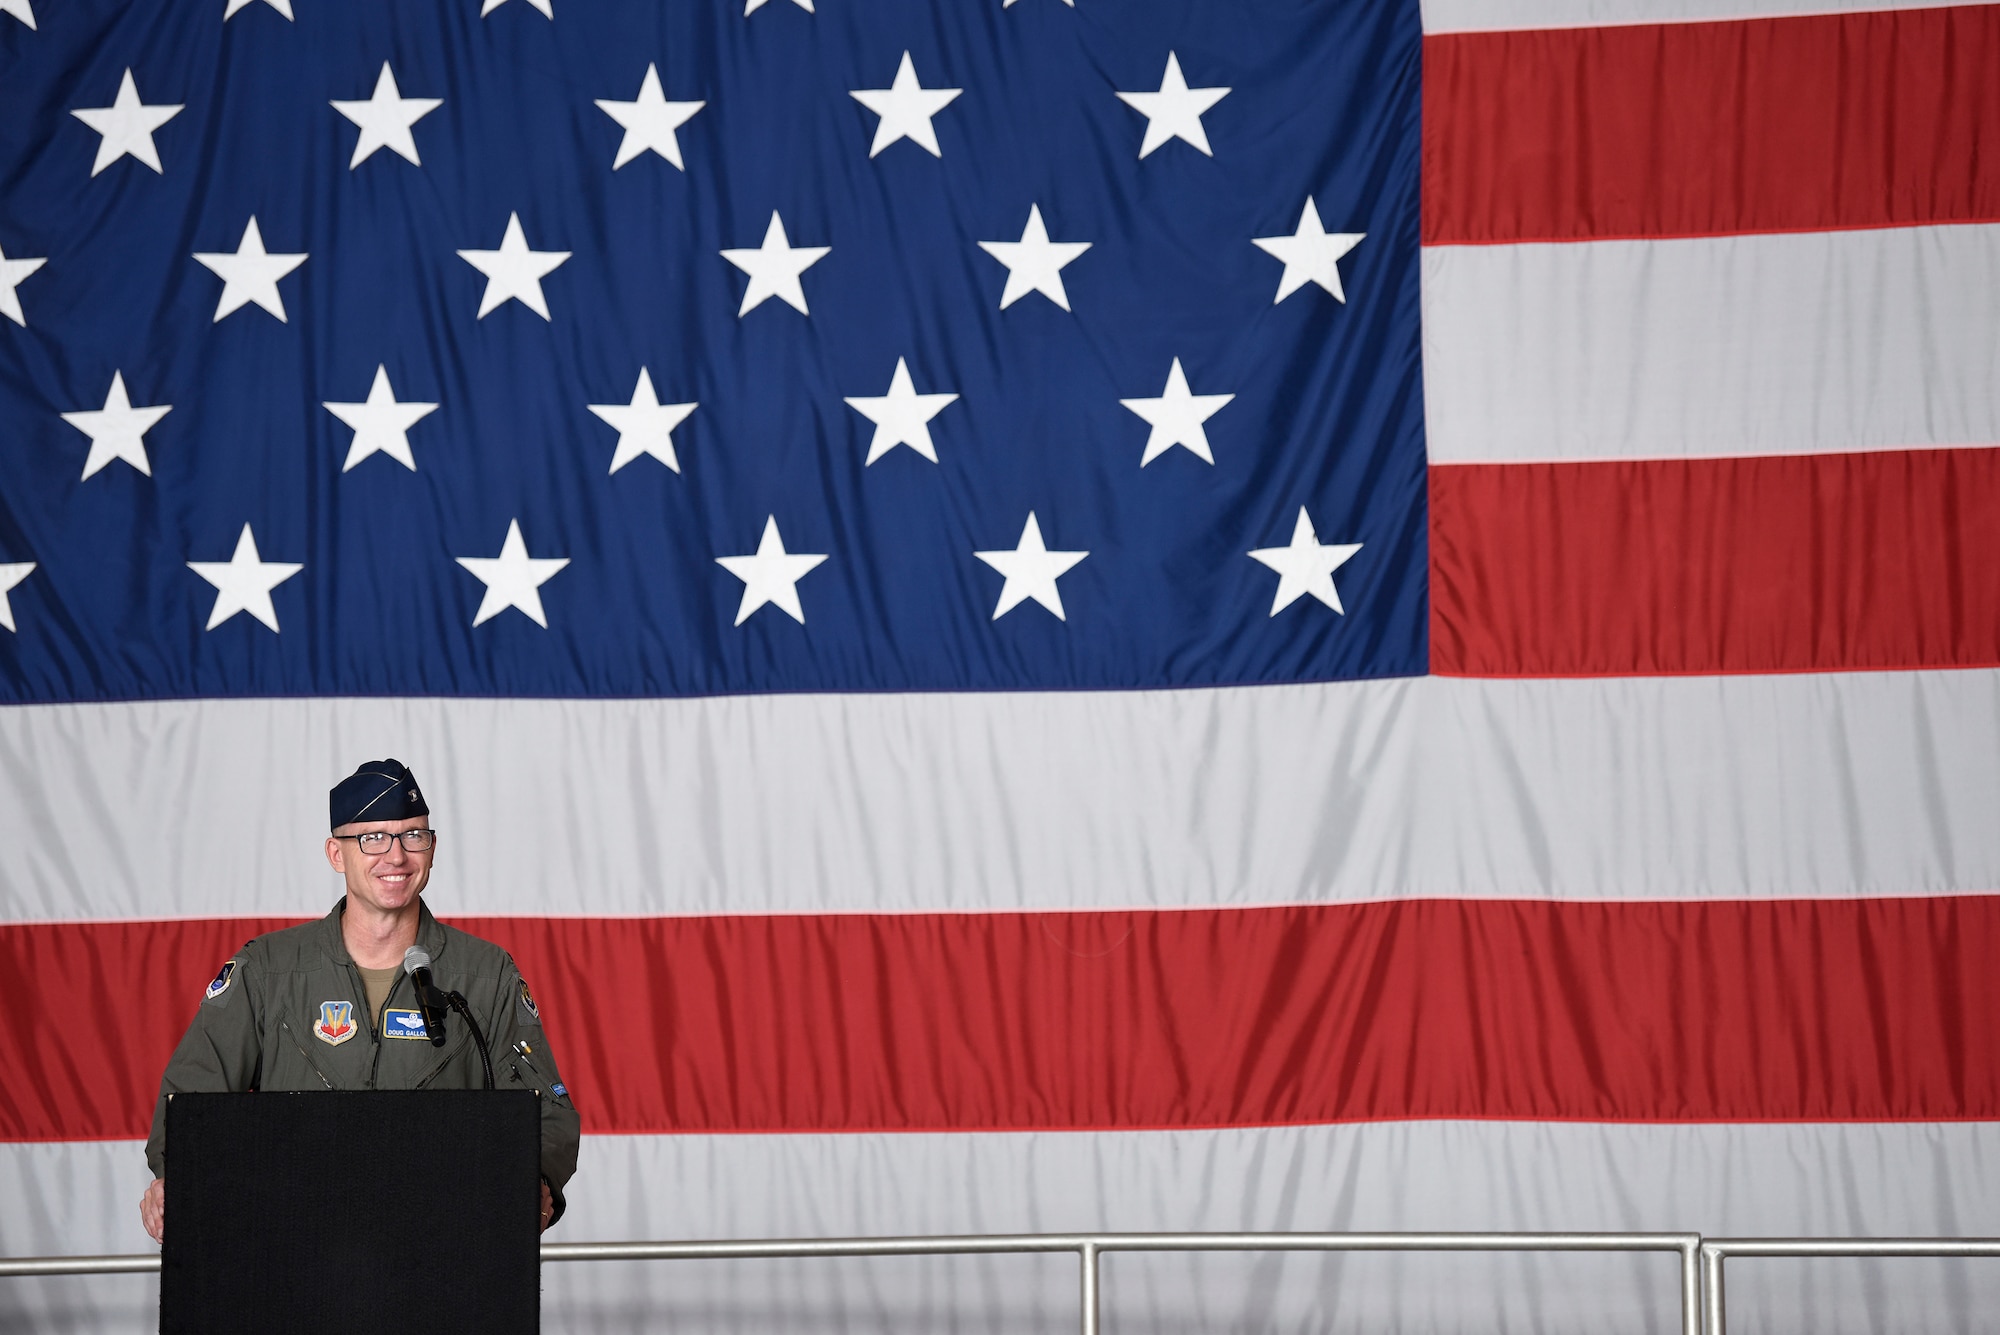 Col. John Galloway Jr., 495th Fighter Group commander, addresses the audience after assuming command during a change of command ceremony at Shaw Air Force Base, South Carolina, June 29, 2022. Col. Mark Massaro relinquished command to Galloway. Brig. Gen. David Mineau, 15th Air Force vice commander, presided over the ceremony. (U.S. Air Force photo by Master Sgt. Andrew Satran)